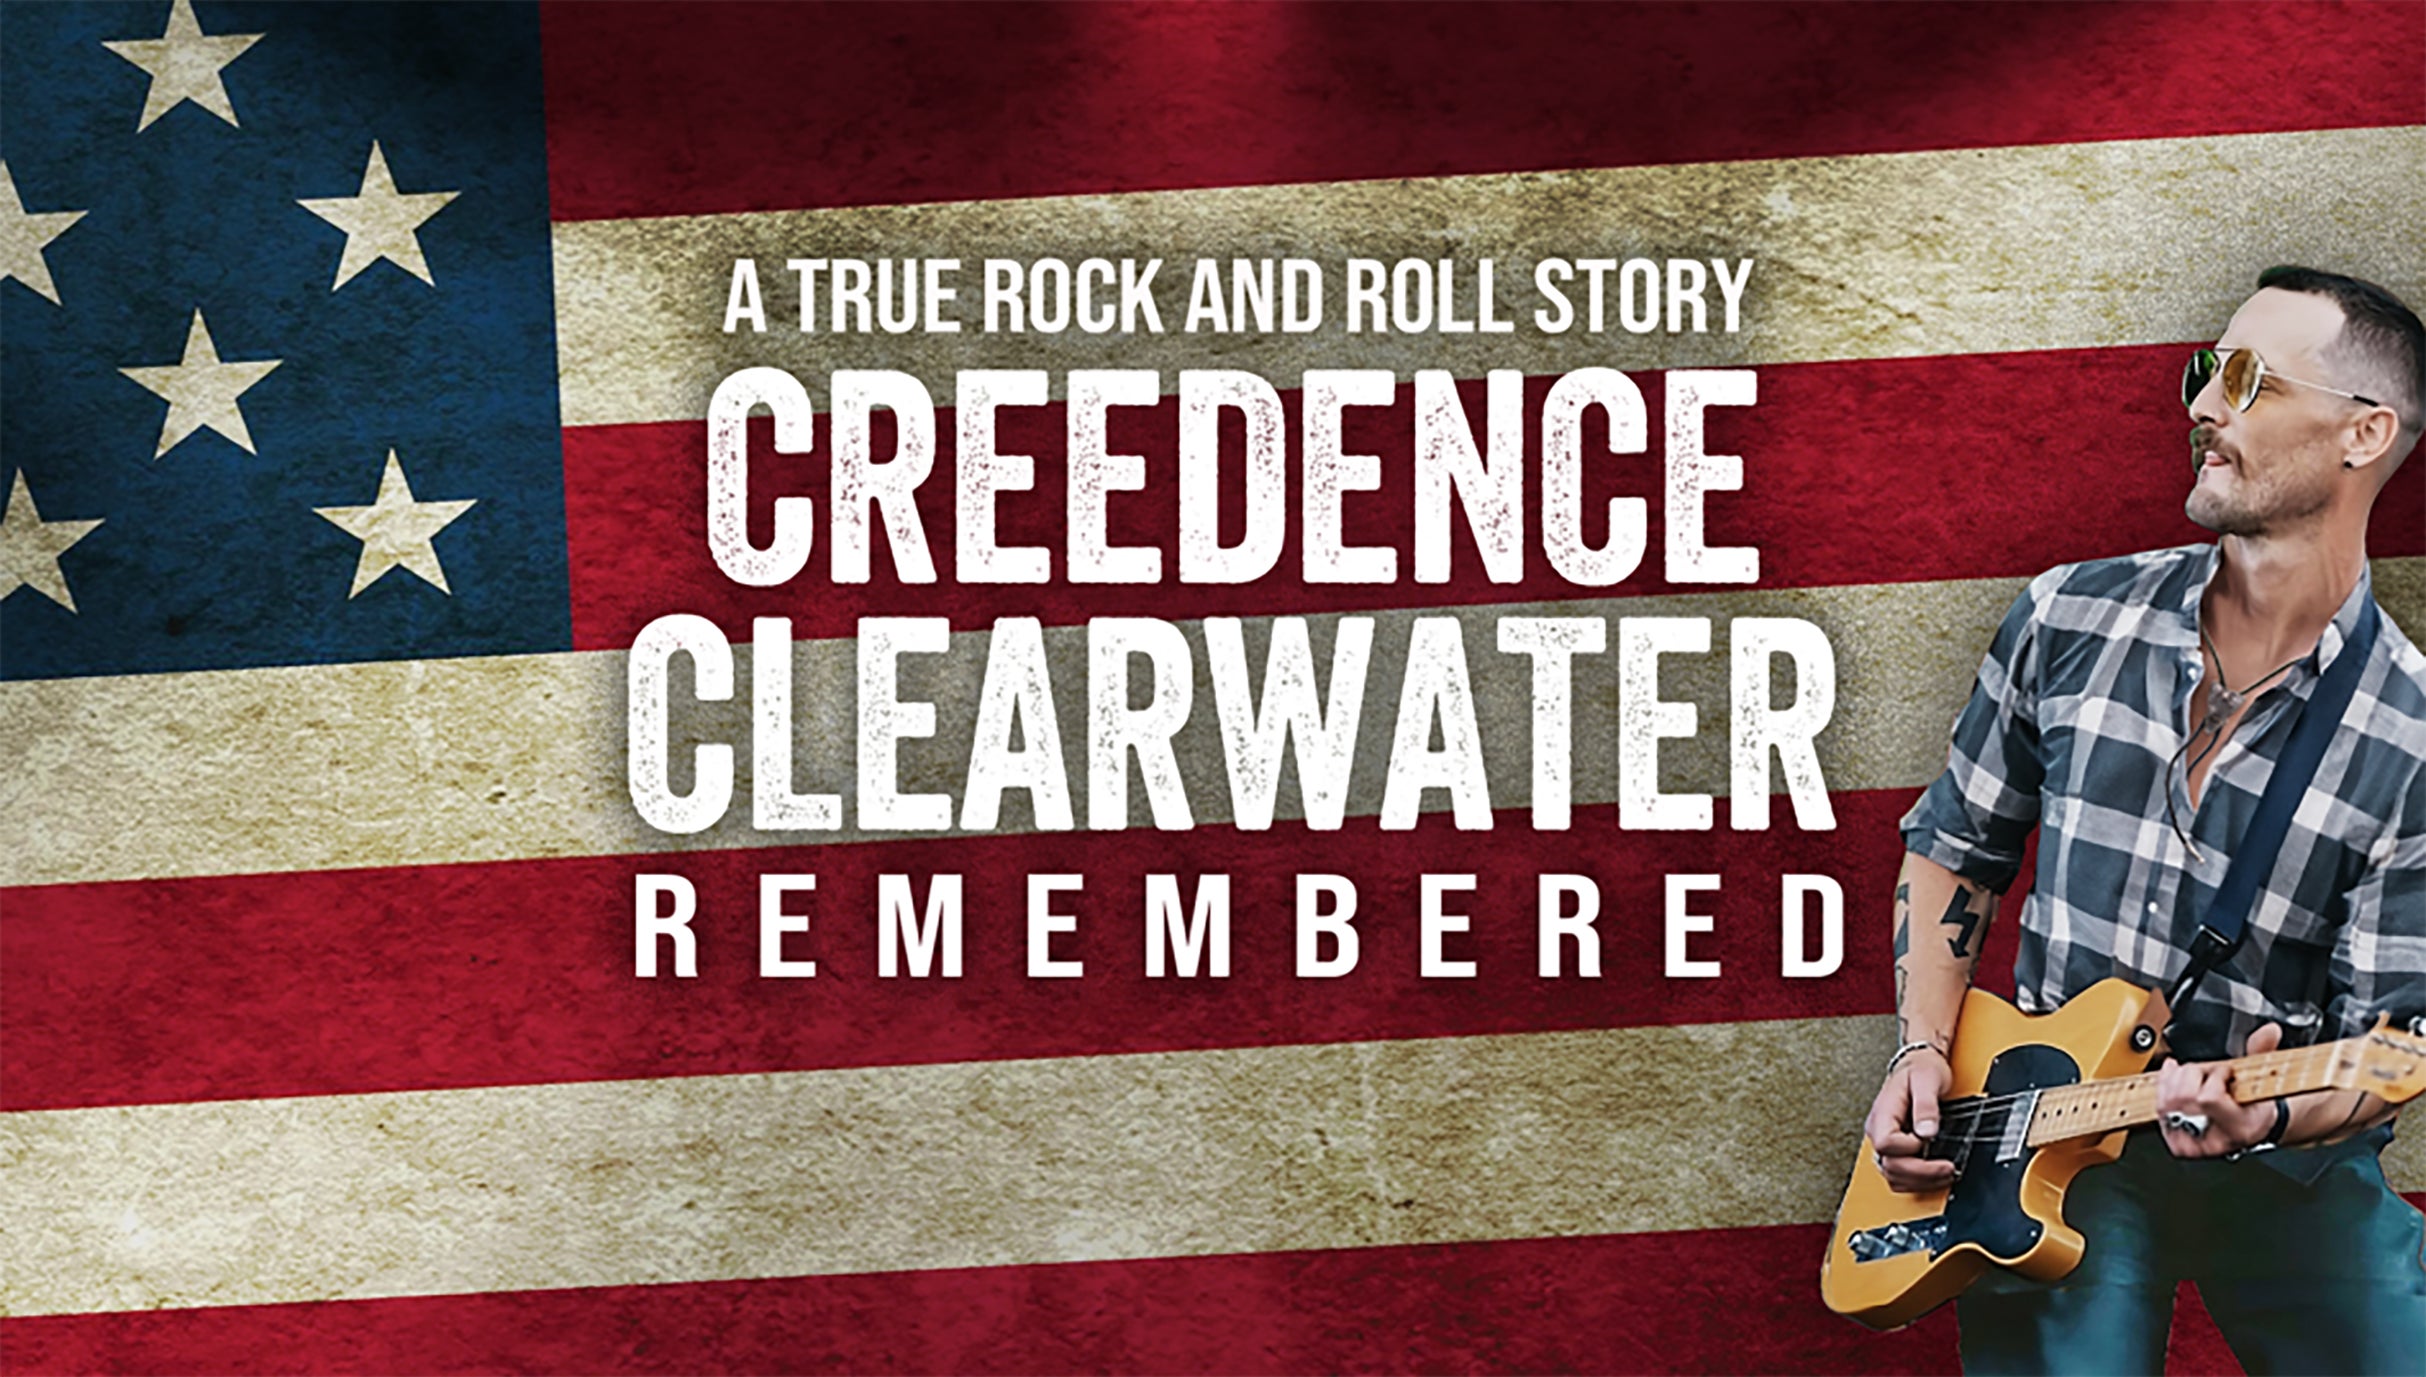 Credence Clearwater Remembered - A True Rock and Roll Story in Edmonton promo photo for Exclusive presale offer code